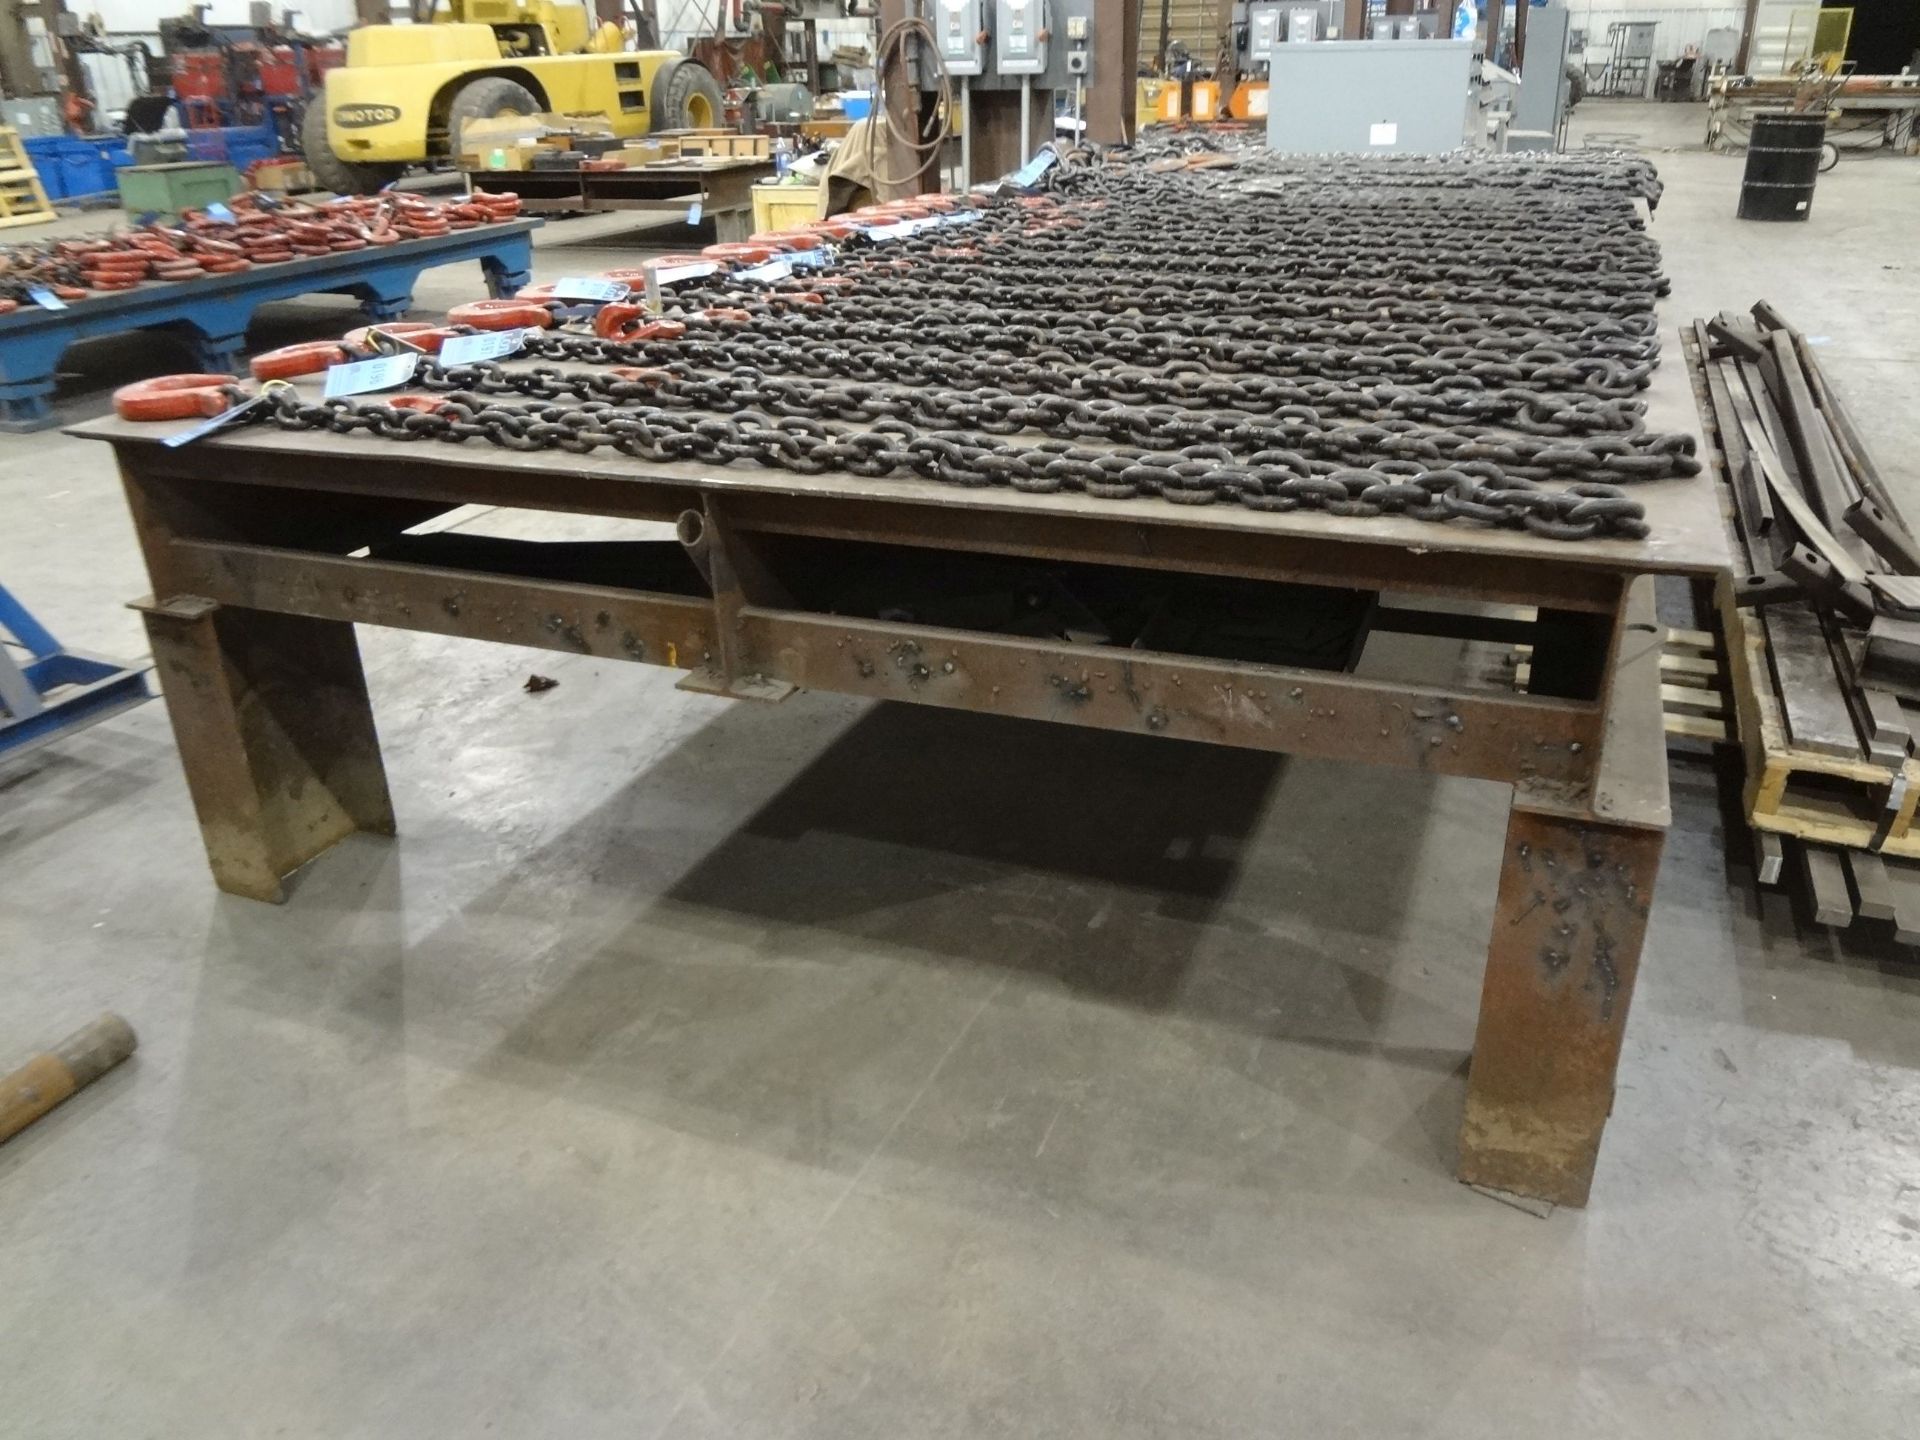 96 1/2" W X 241"L X 36"H X 3/8" THICK STEEL TOP PLATE SHOP FABRICATED WELDED STEEL FRAME LAY-OUT - Image 2 of 2